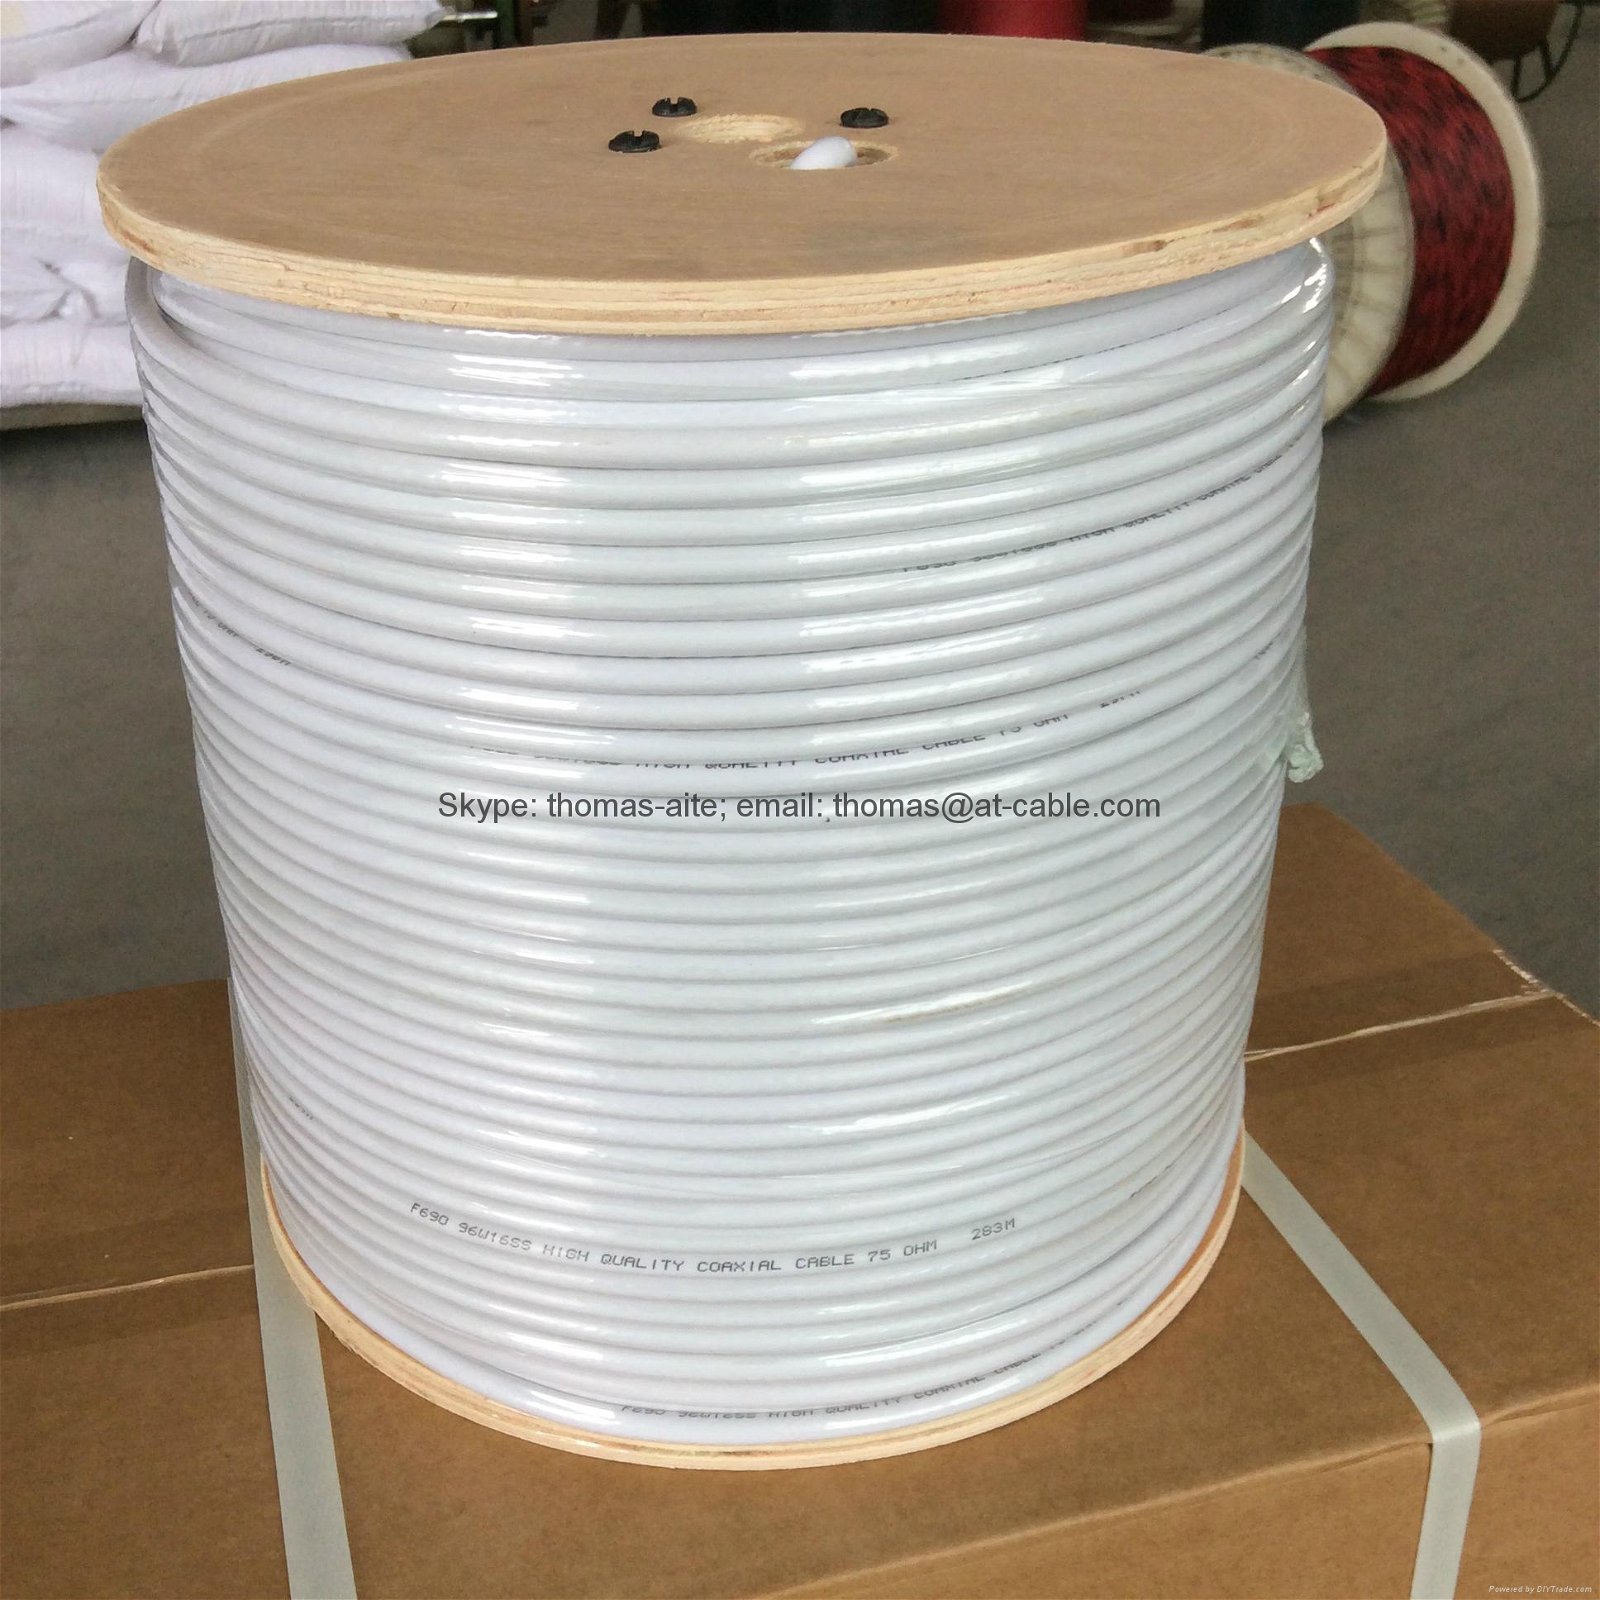 Coaxial cable fill with oil jalley 305m